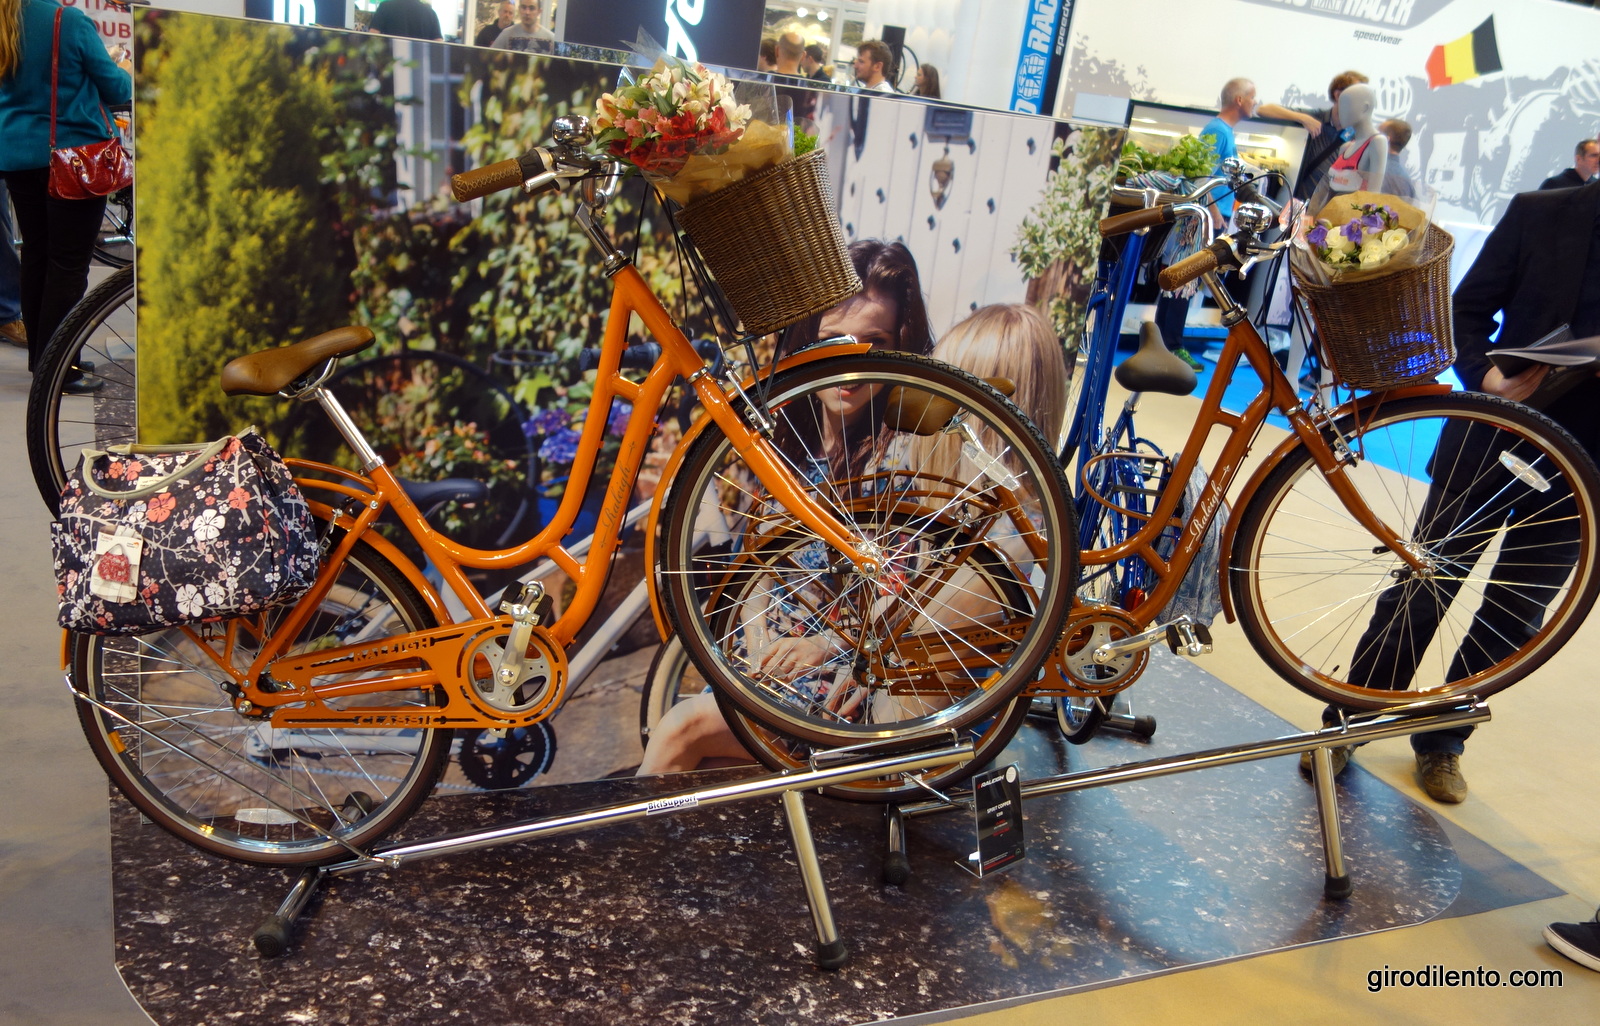 Town bikes from Raleigh with a basket - plenty of bikes with baskets at this years show